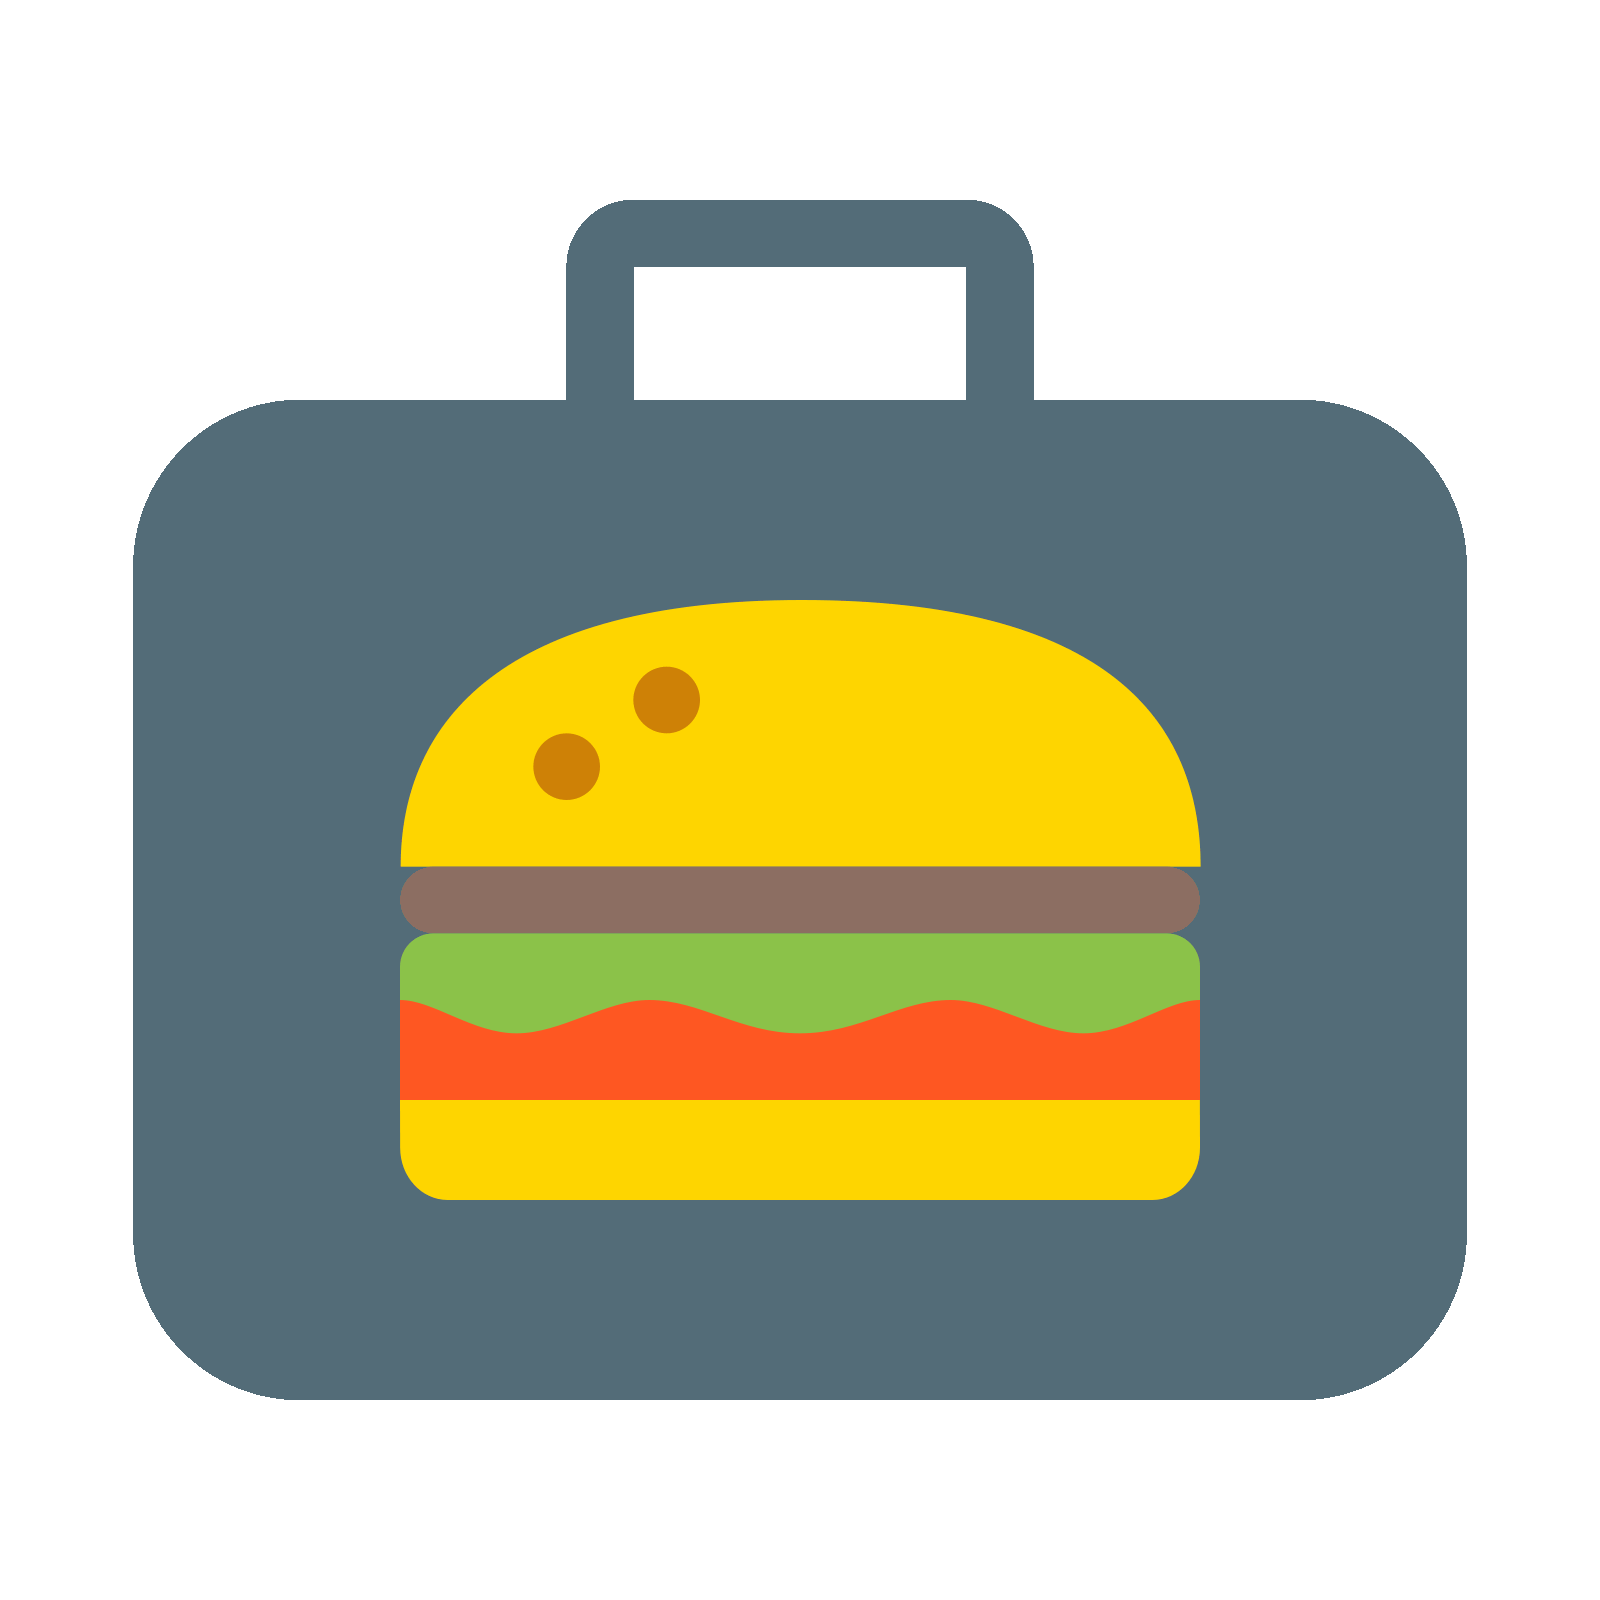 Lunchbox icon free download. Clipart lunch tiffin box